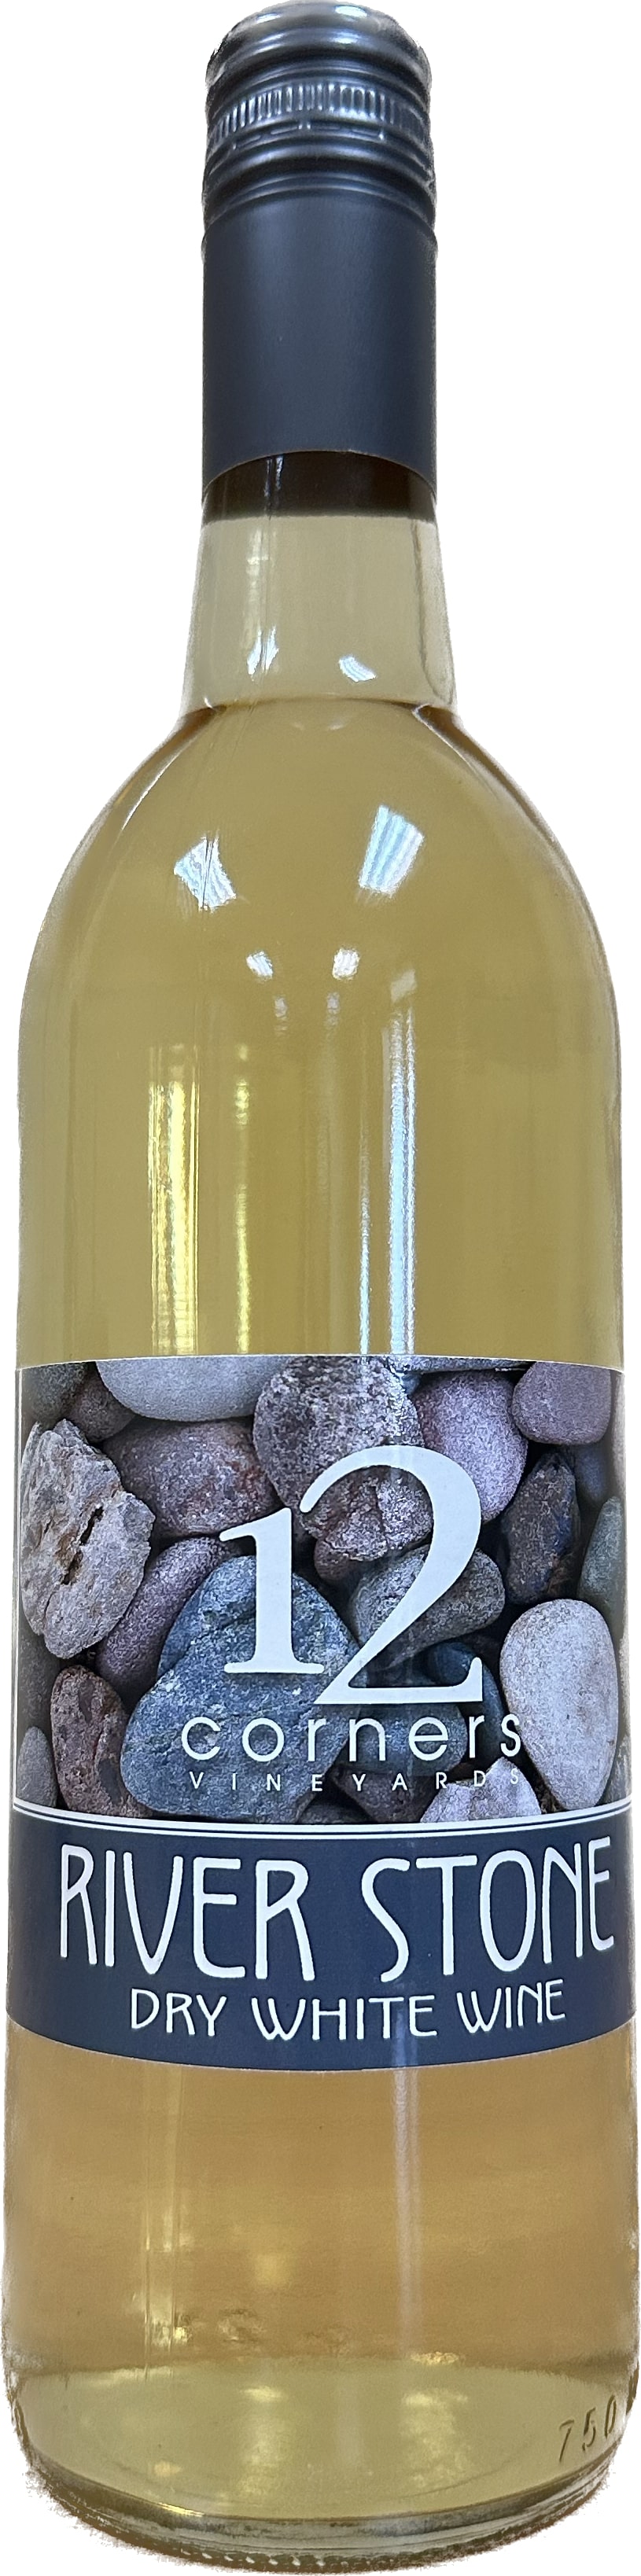 Product Image for River Stone Dry White